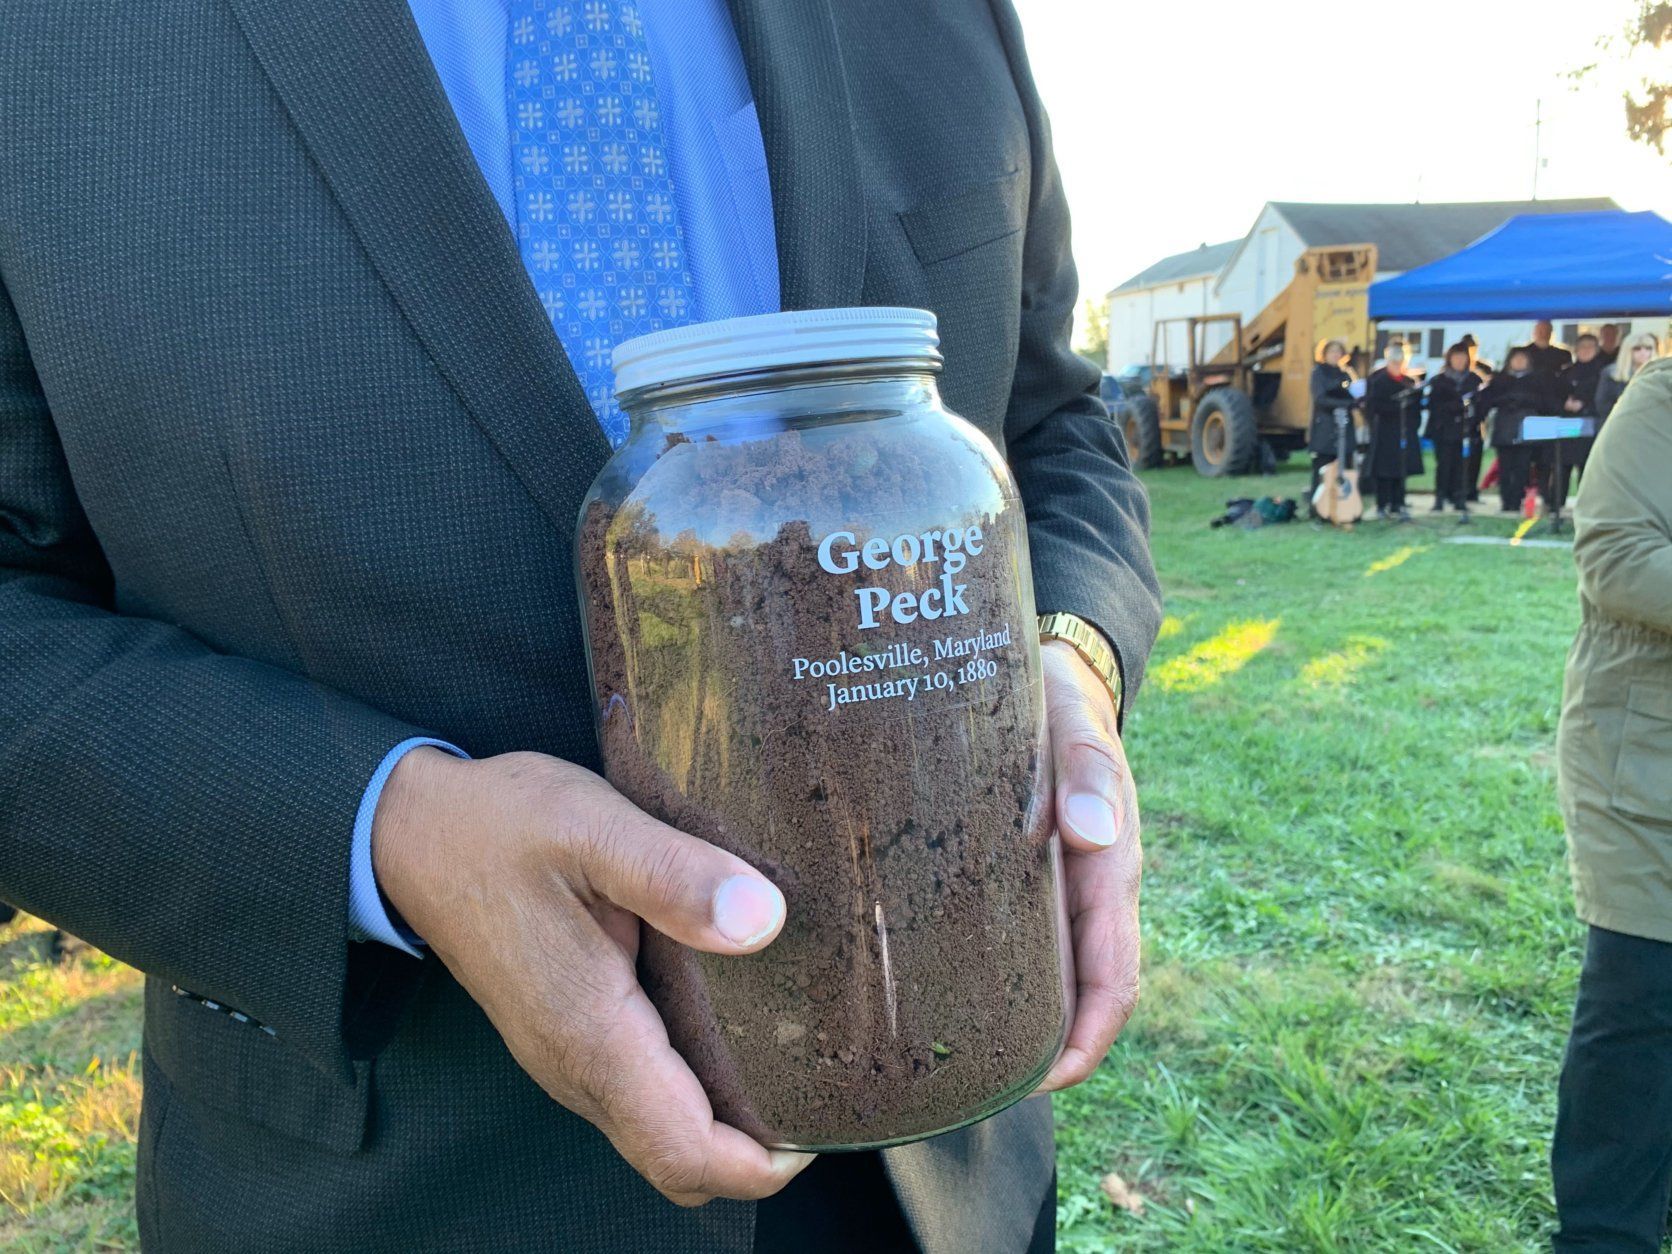 The dirt was collected into jars, some of which will sit in the Legacy Museum of the Equal Justice Initiative.